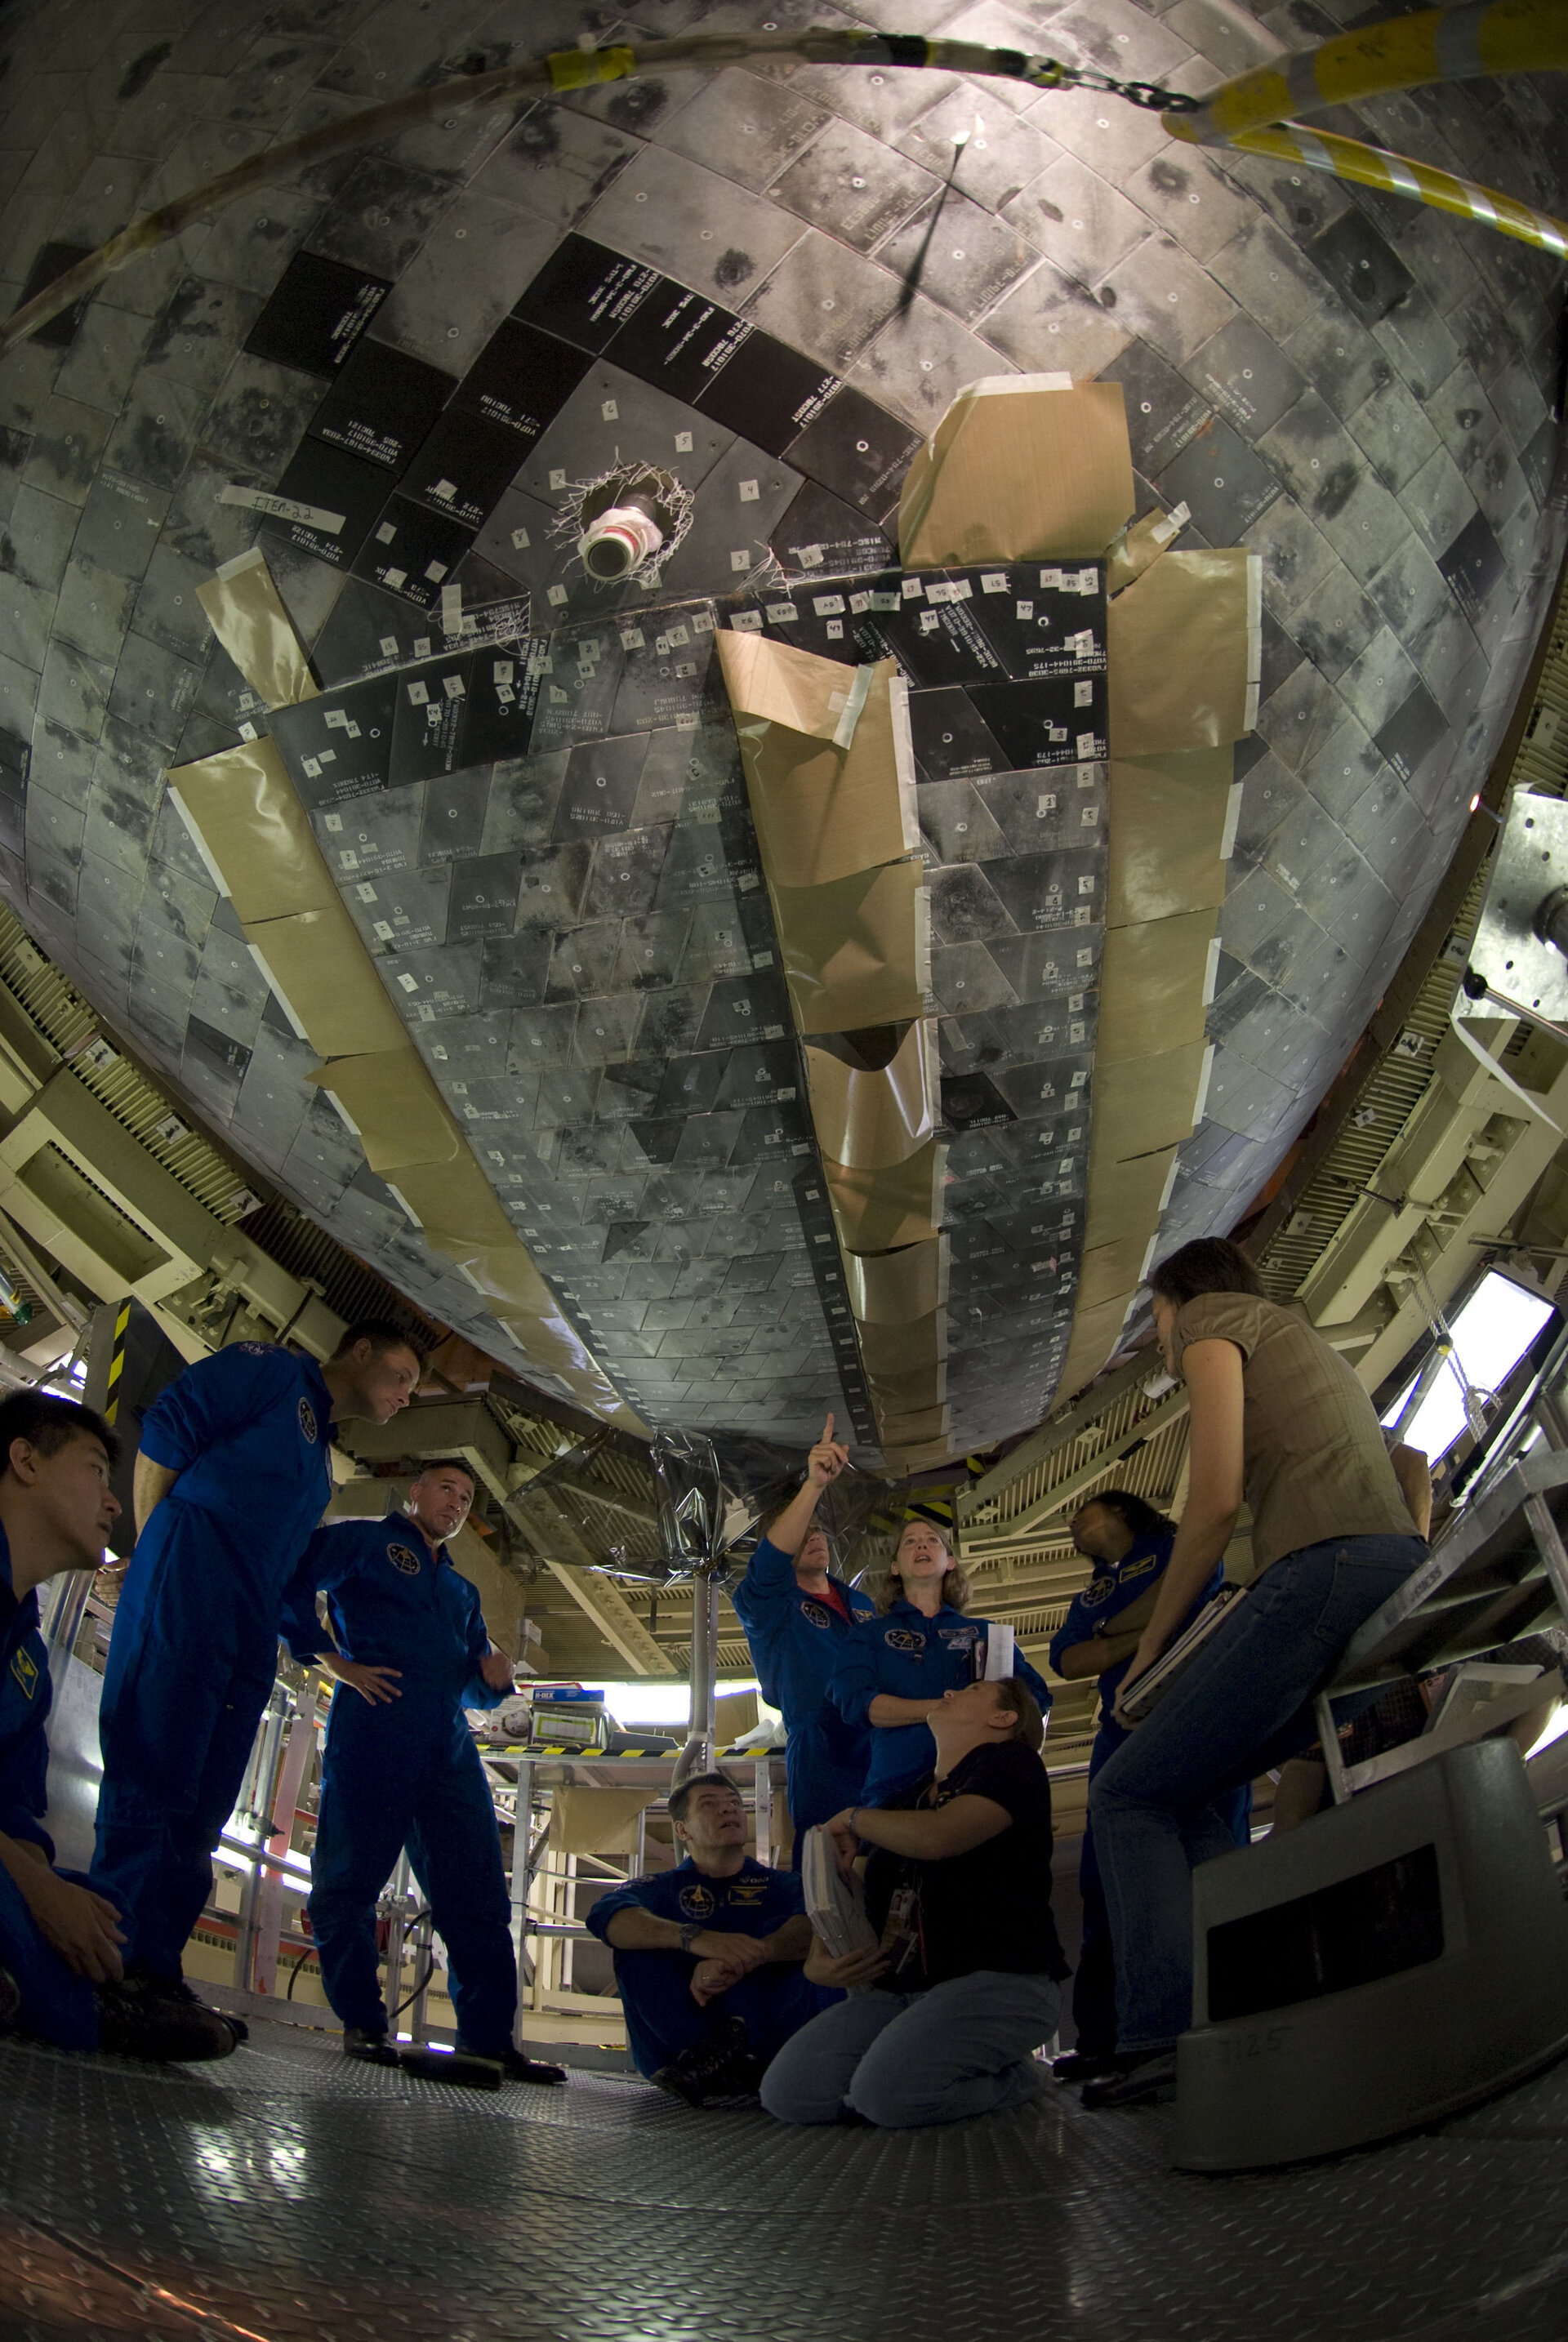 Crew of STS-120 with Paolo Nespoli inspect Discovery's heatshield during the CEIT at KSC